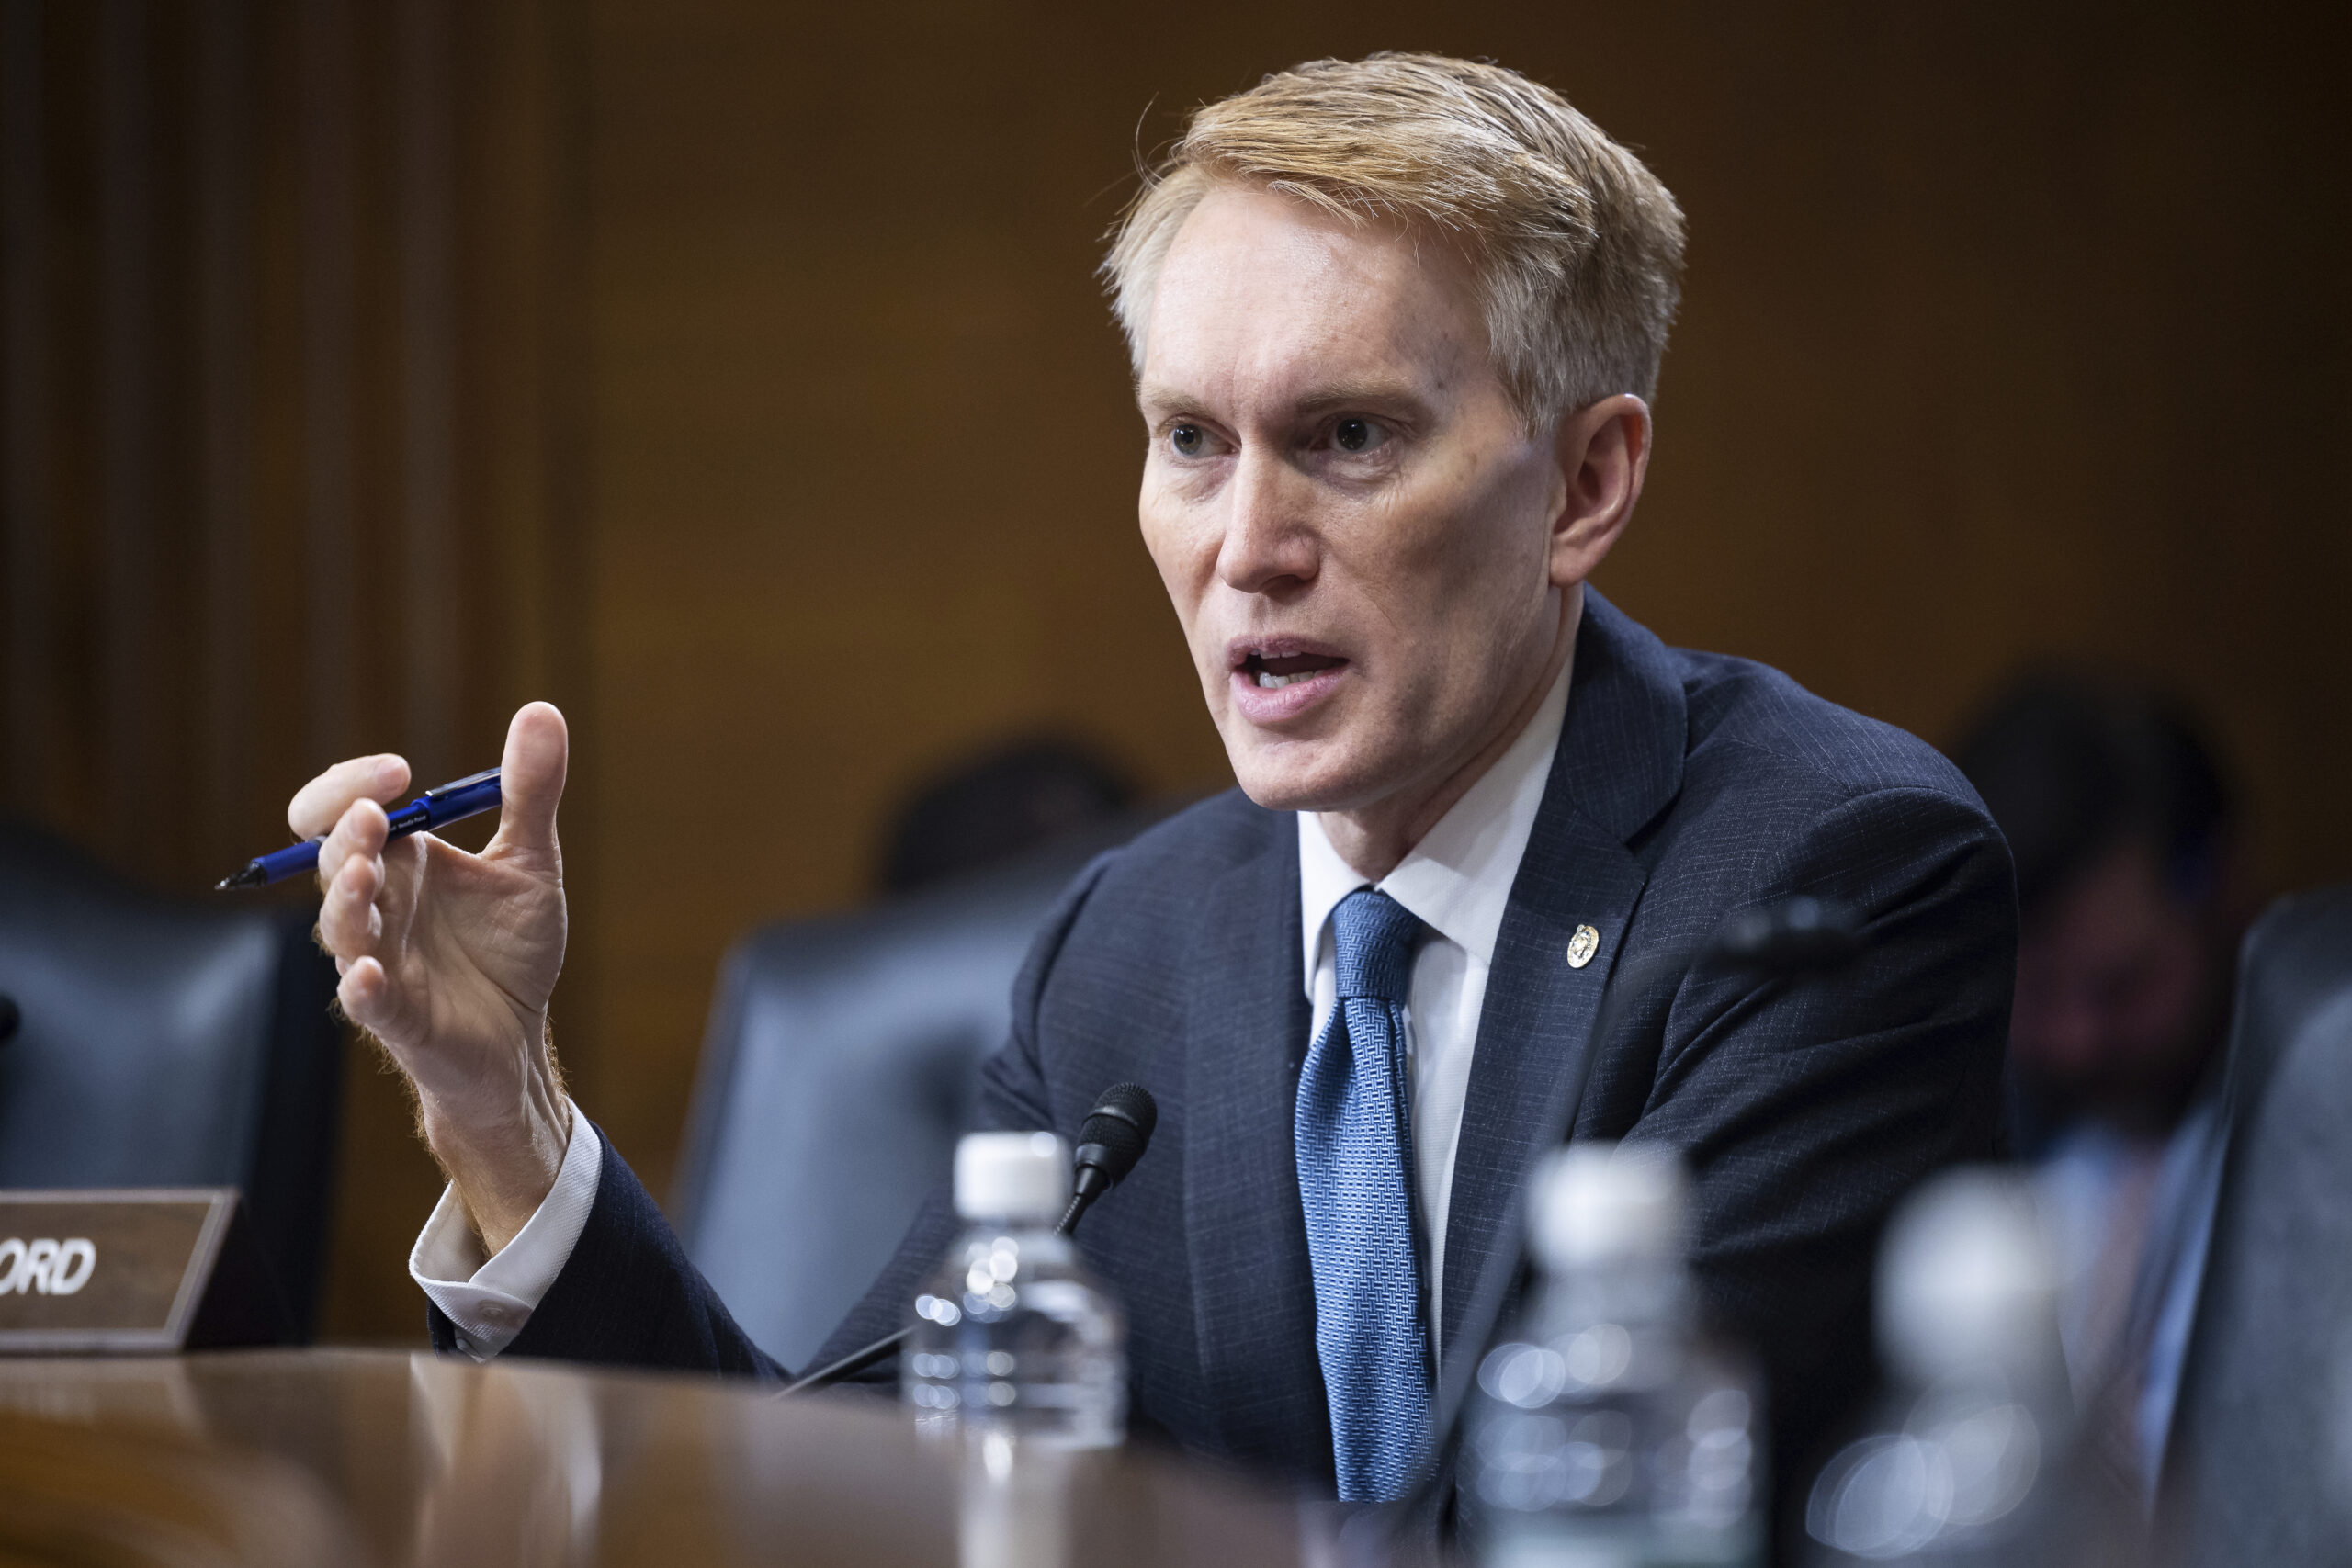 Why James Lankford thinks he can secure the border, aid Ukraine, and win Democratic vote